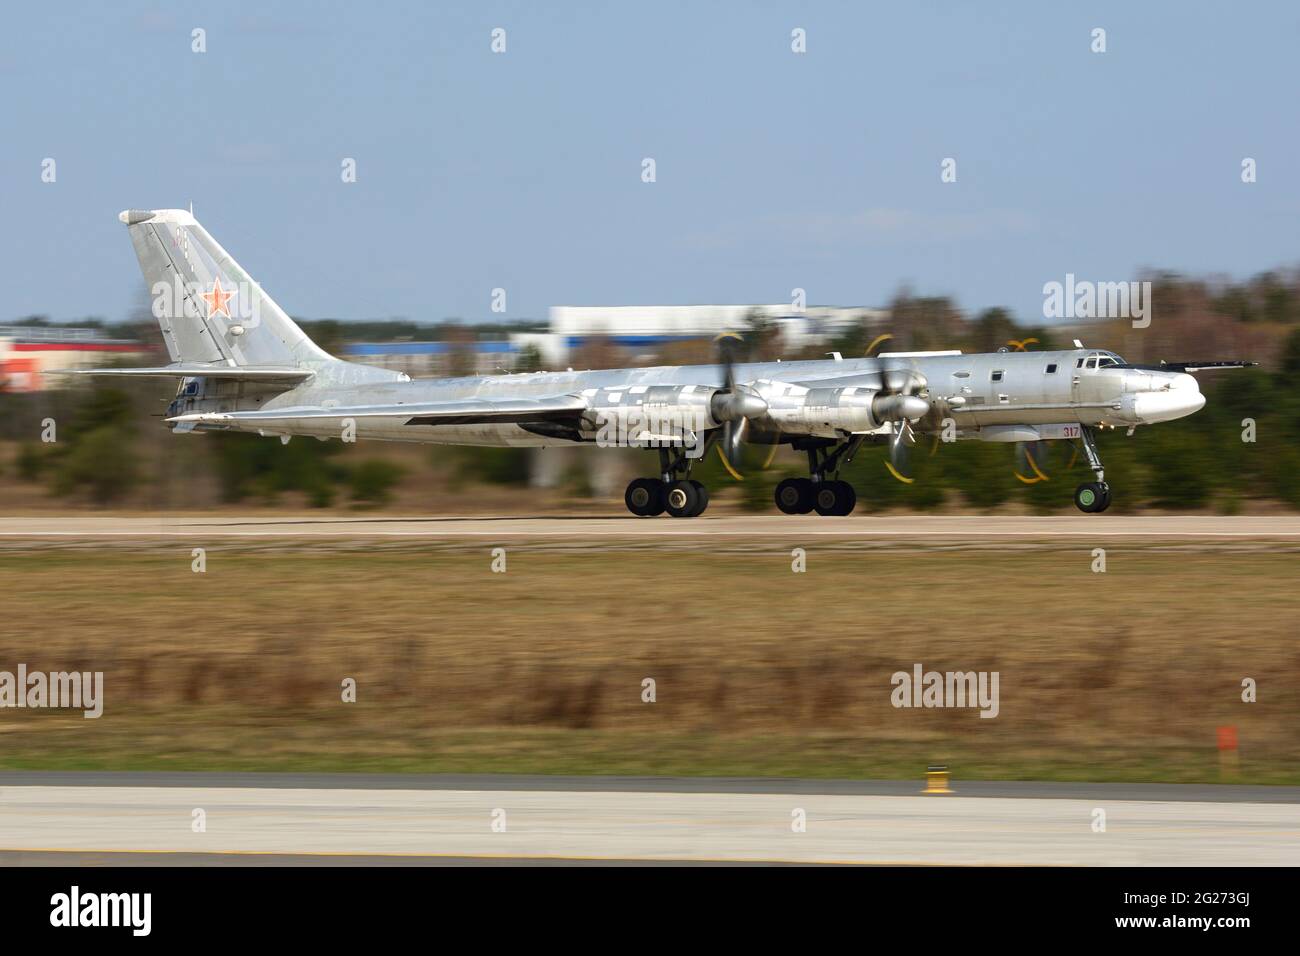 Tu-95MS strategic bomber of the Russian Air Force taking off, Zhukovsky, Russia. Stock Photo